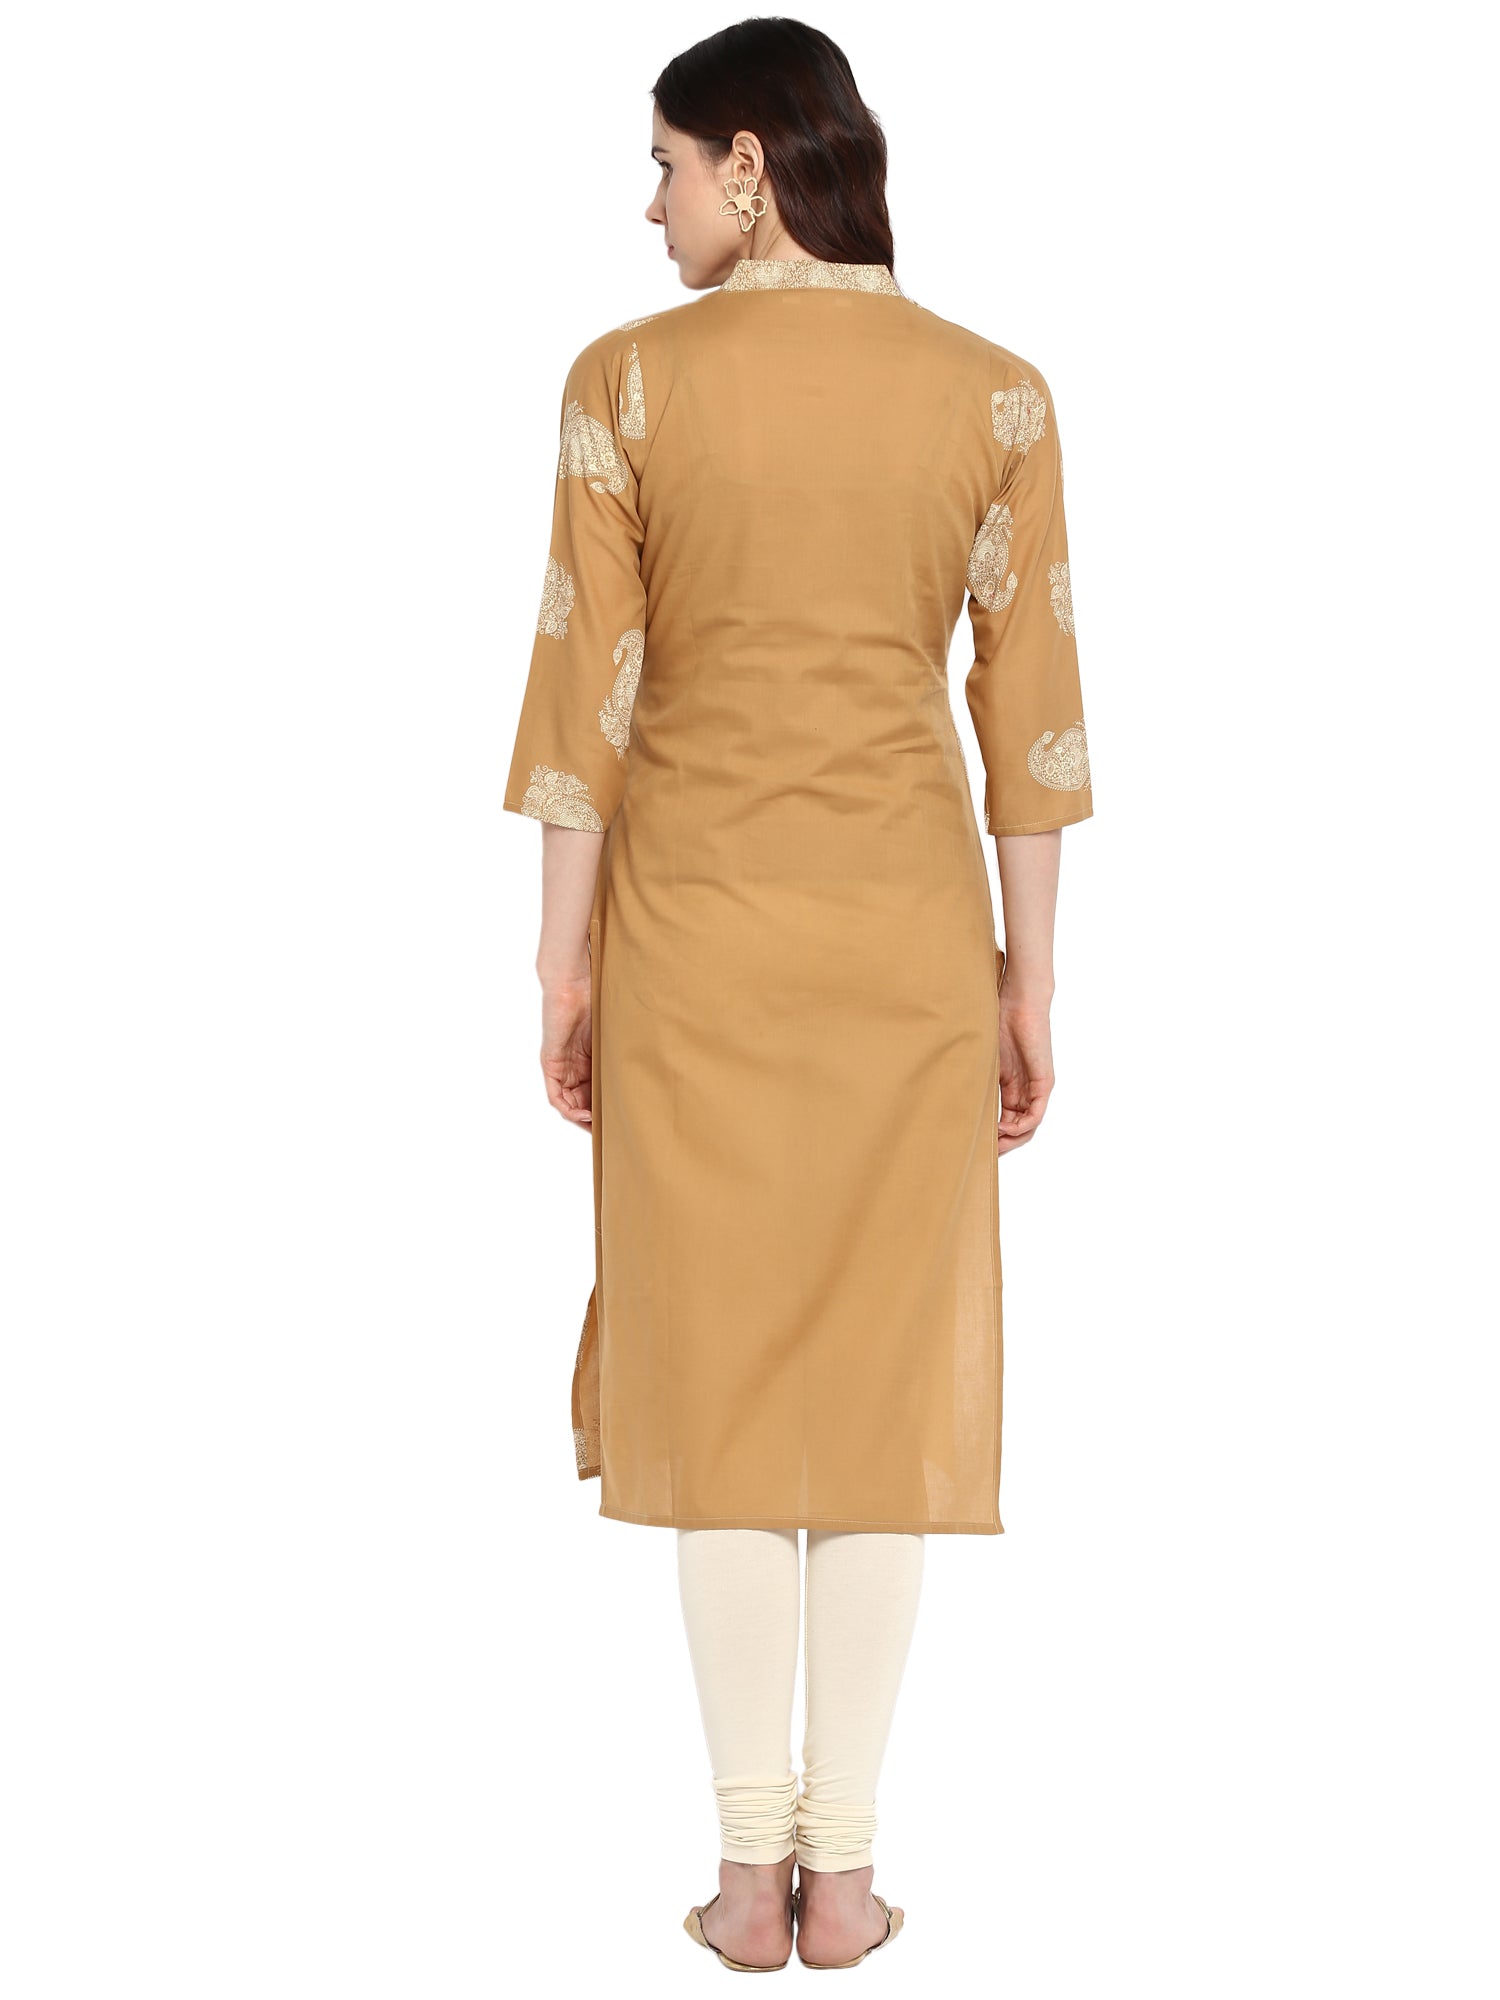 Women's Beige Printed Cotton Only Kurta With Gota Patti Lace Highlights - Ahalyaa